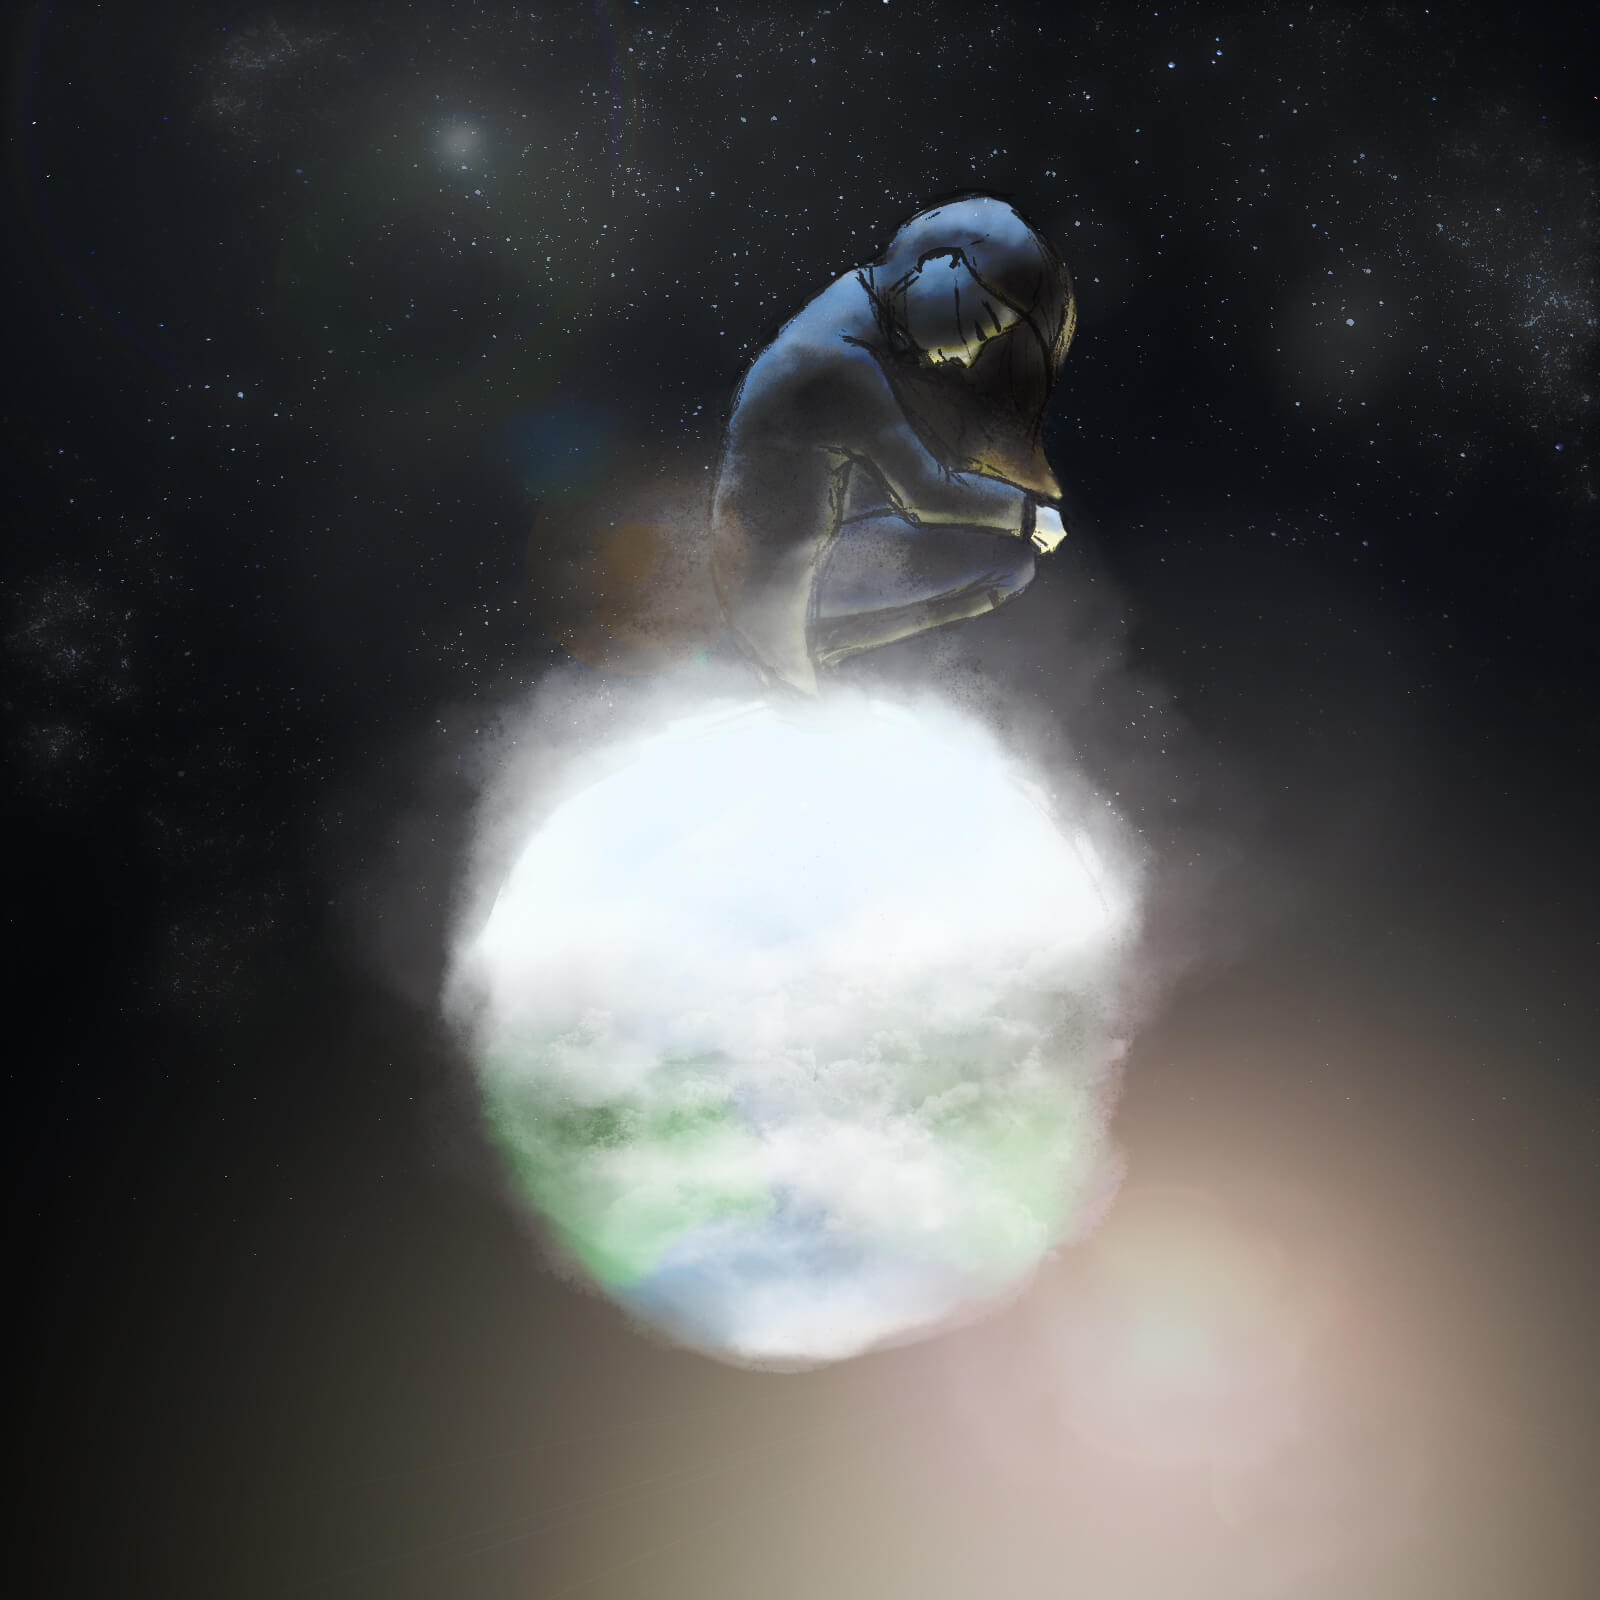 A woman sits atop a tiny frozen planet in space, looking downward at a warm light with a faint smile on her face.